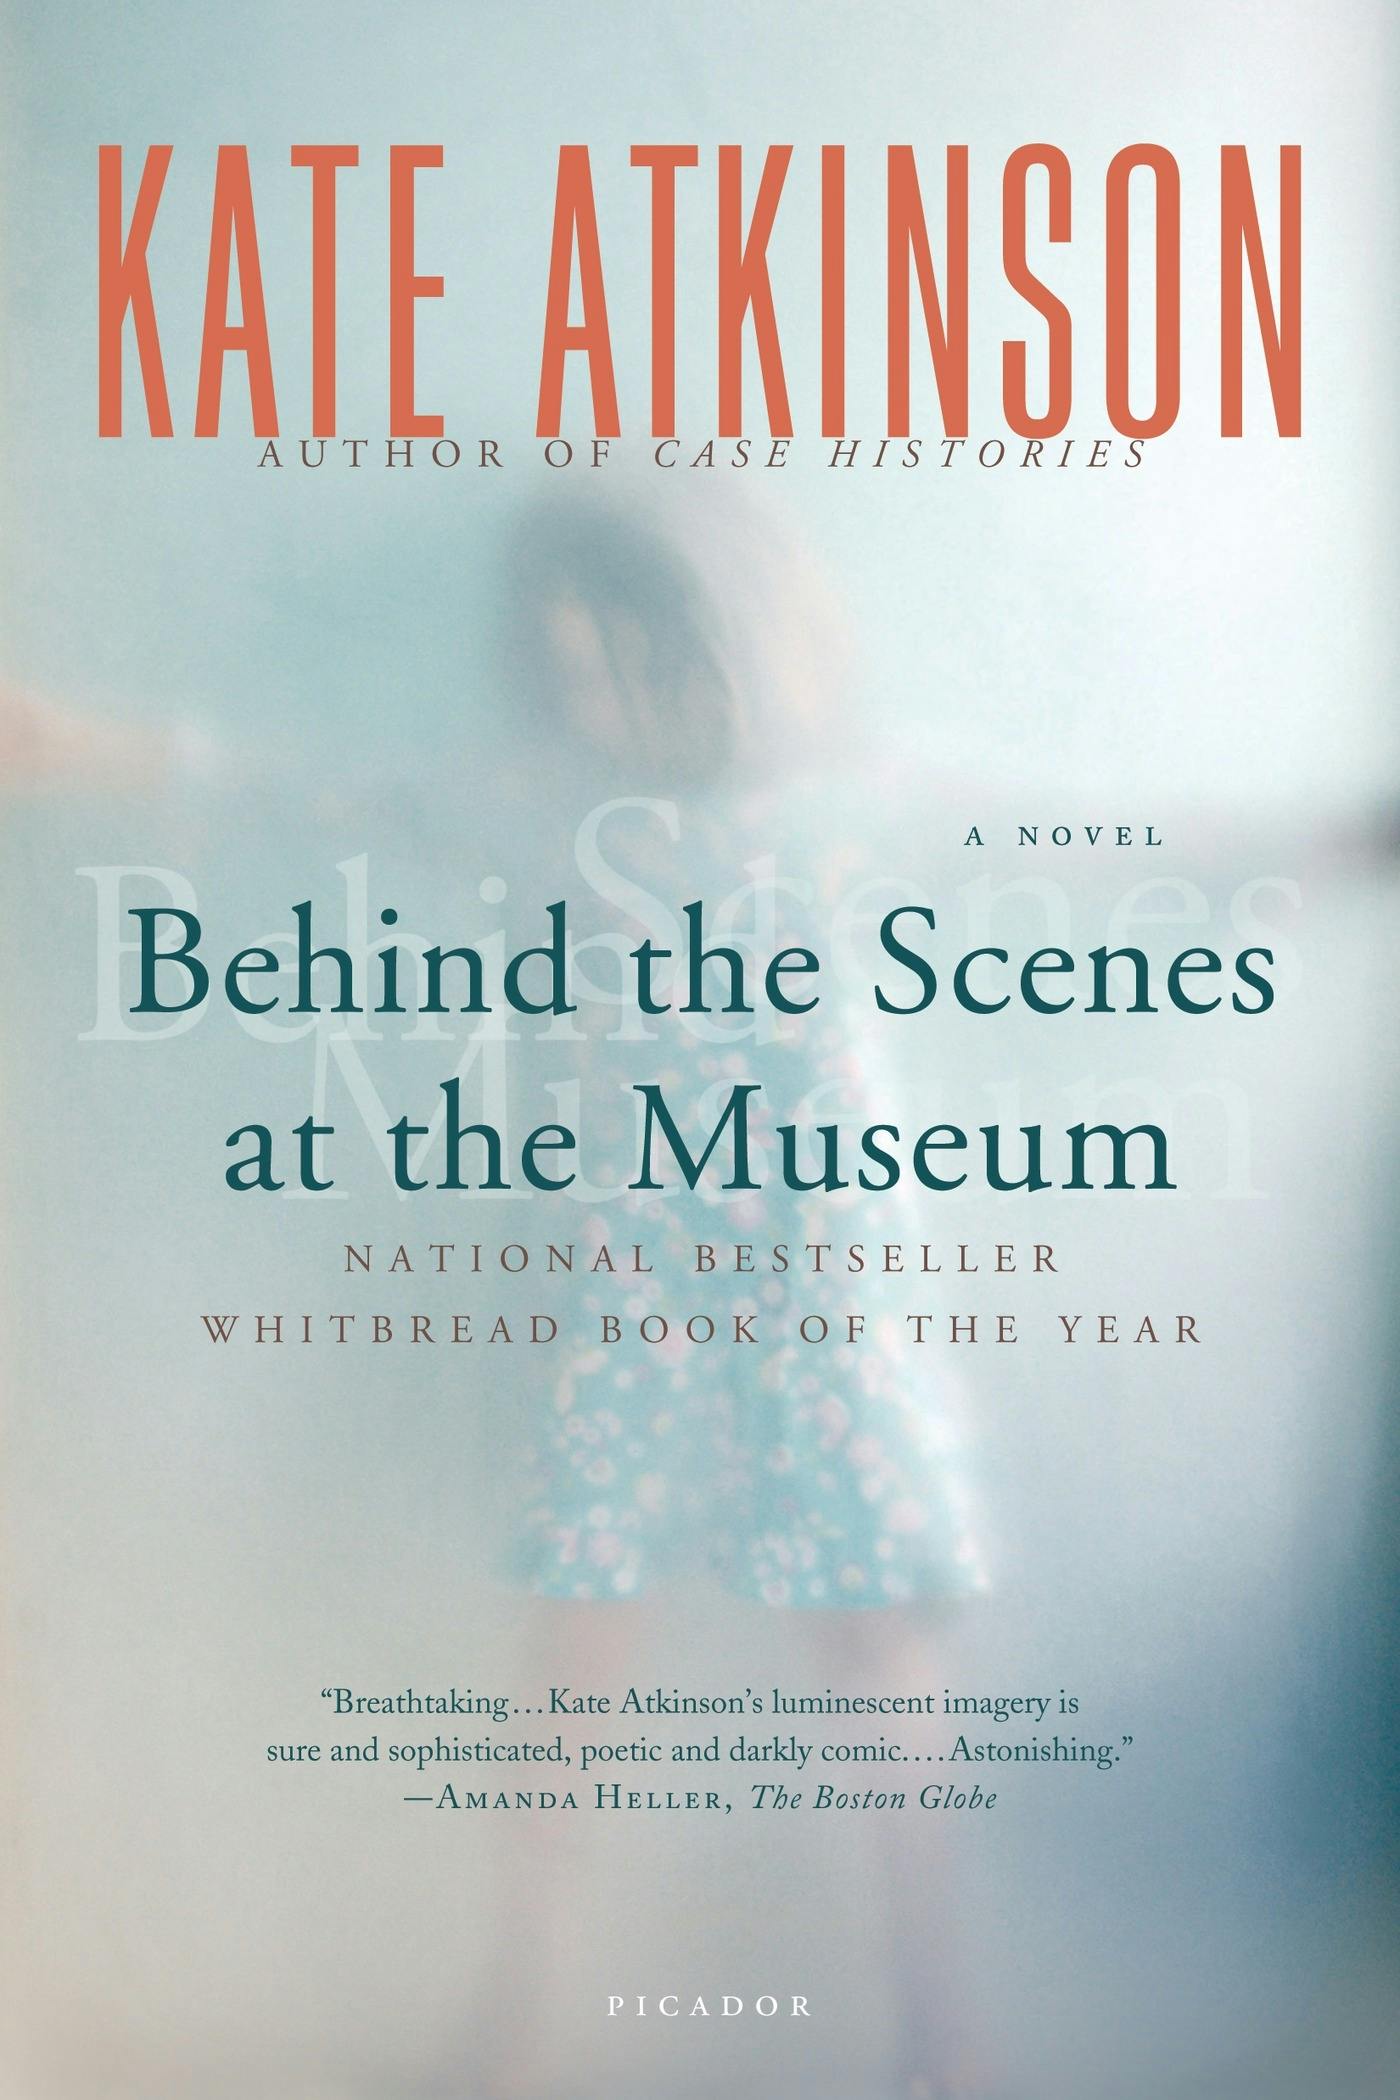 BEHIND THE SCENES AT THE MUSEUM Kate Atkinson 3 Audio CDs NEW UNSEALED 